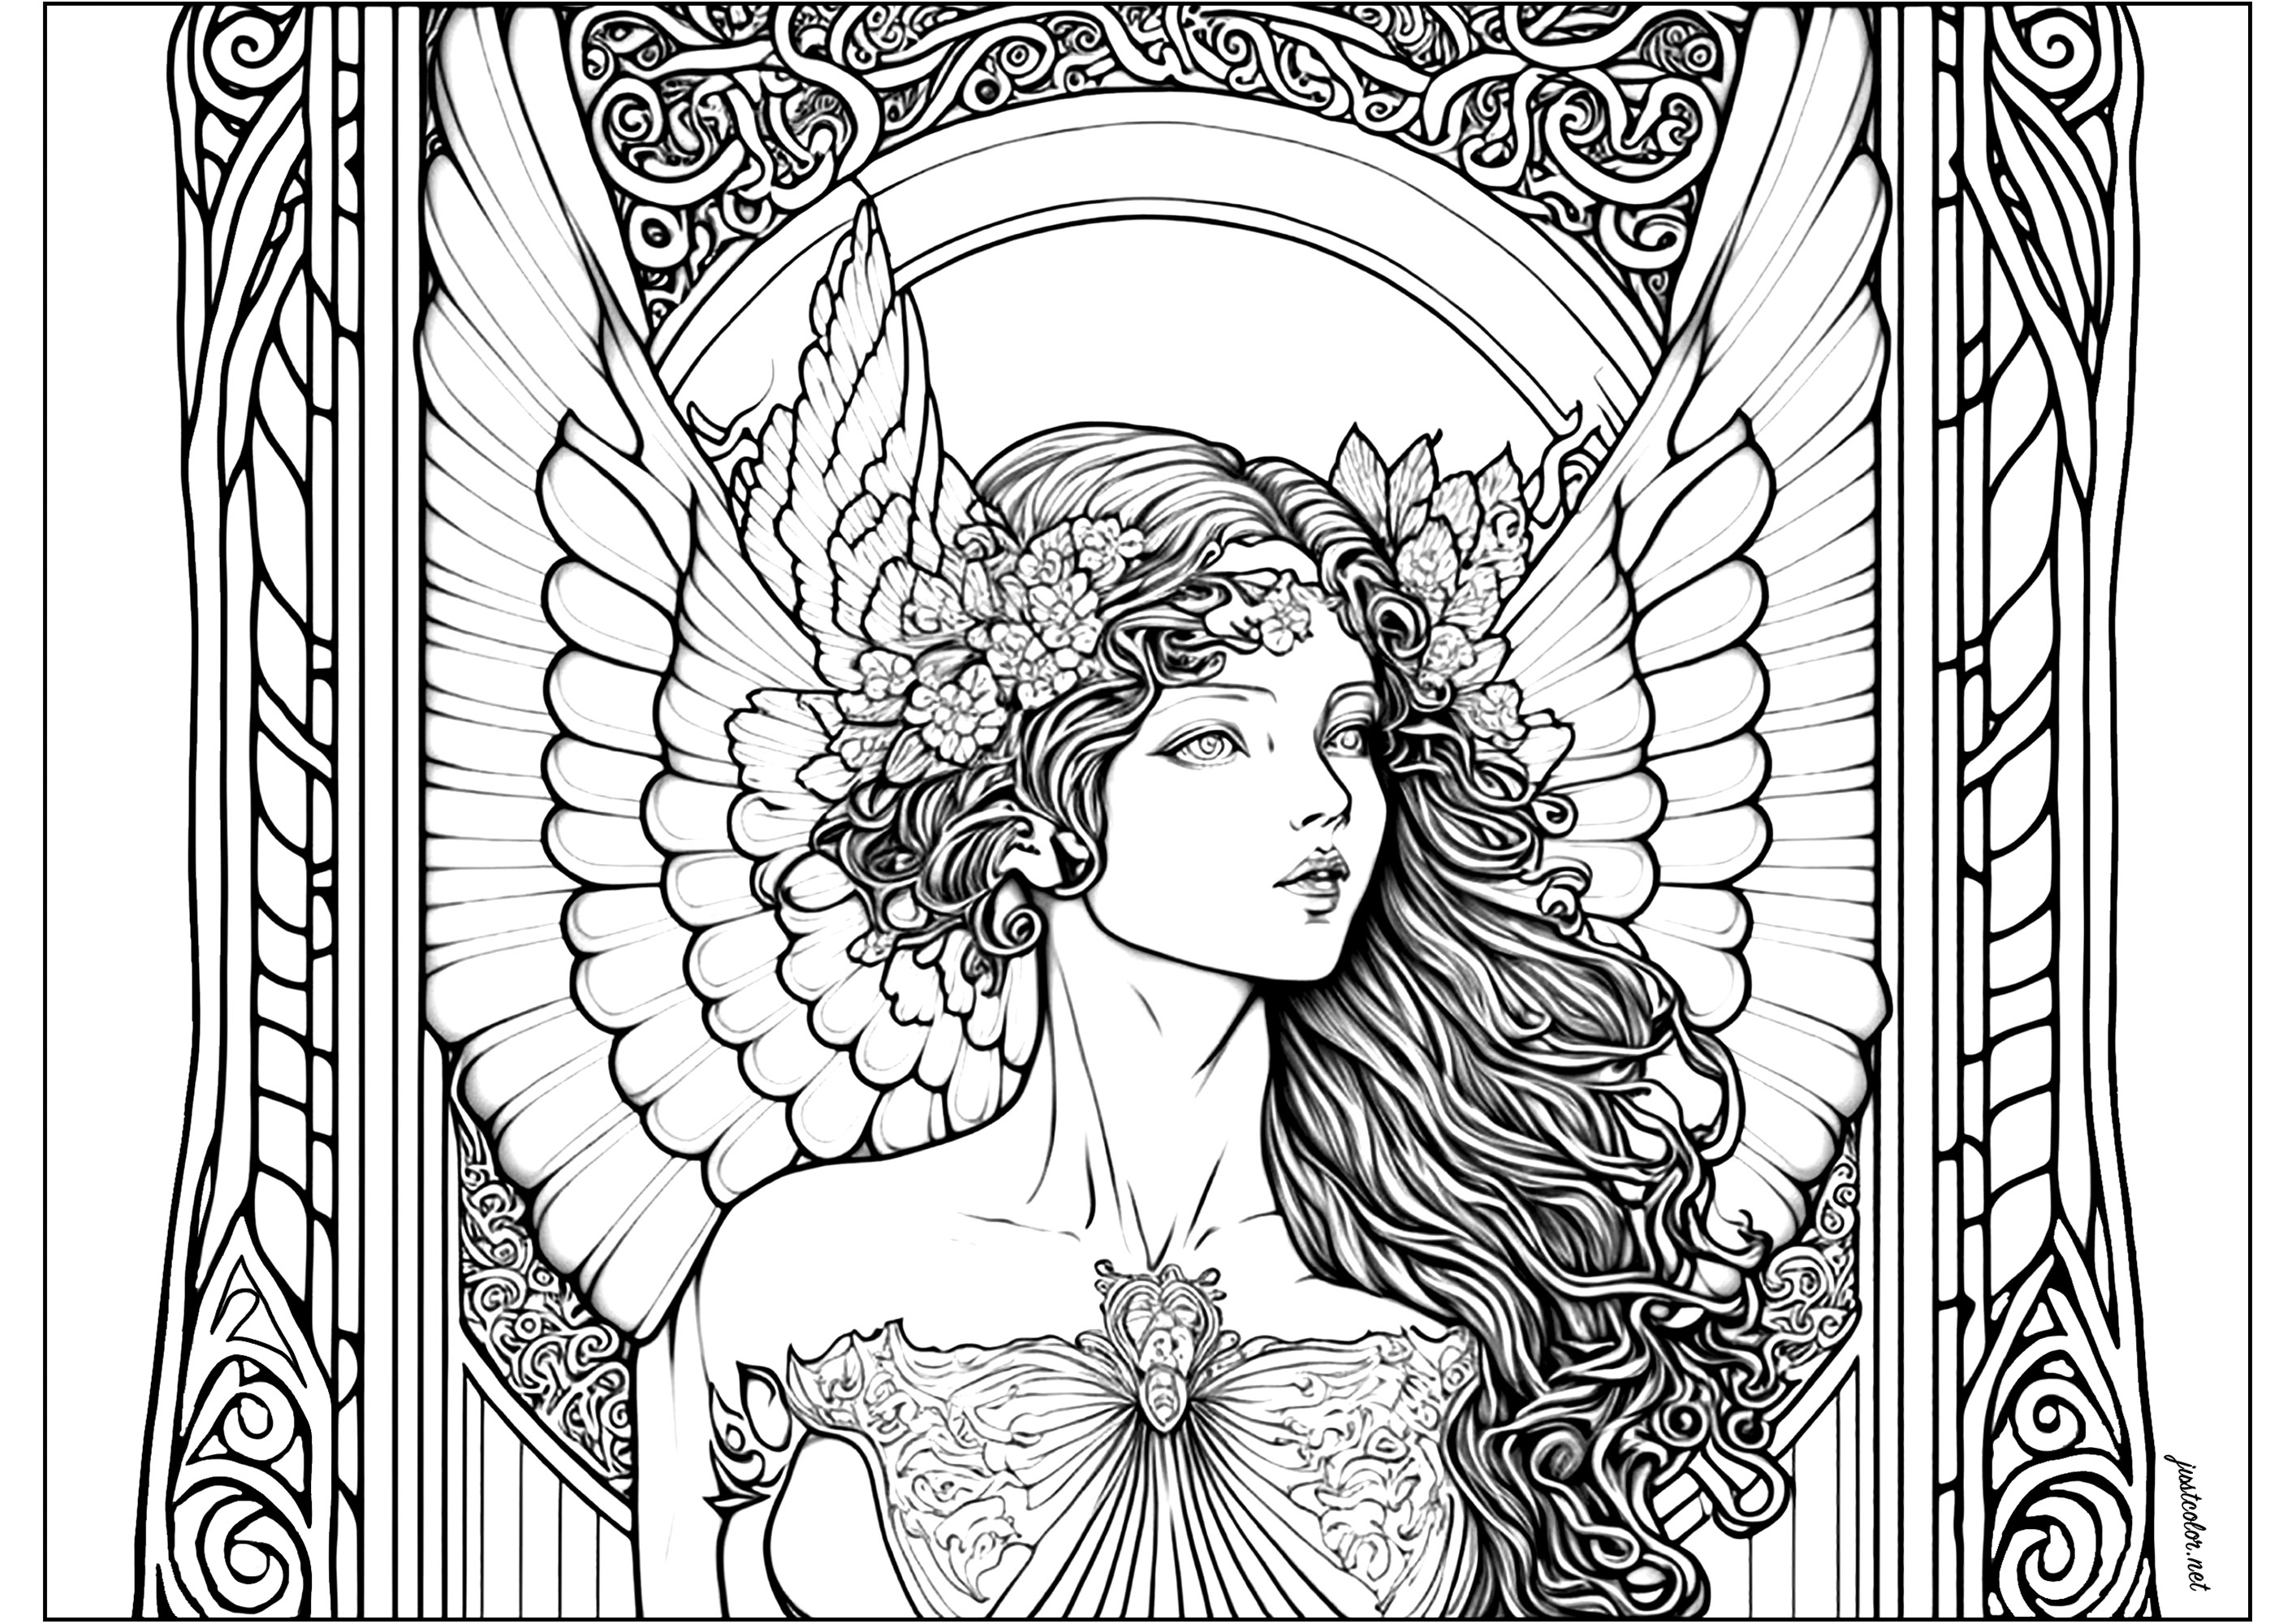 Pretty winged woman. A lovely winged woman, with motifs freely inspired by the Art Nouveau style. The contours are delicate and detailed, and the figure's gaze inspires contemplation and letting go.